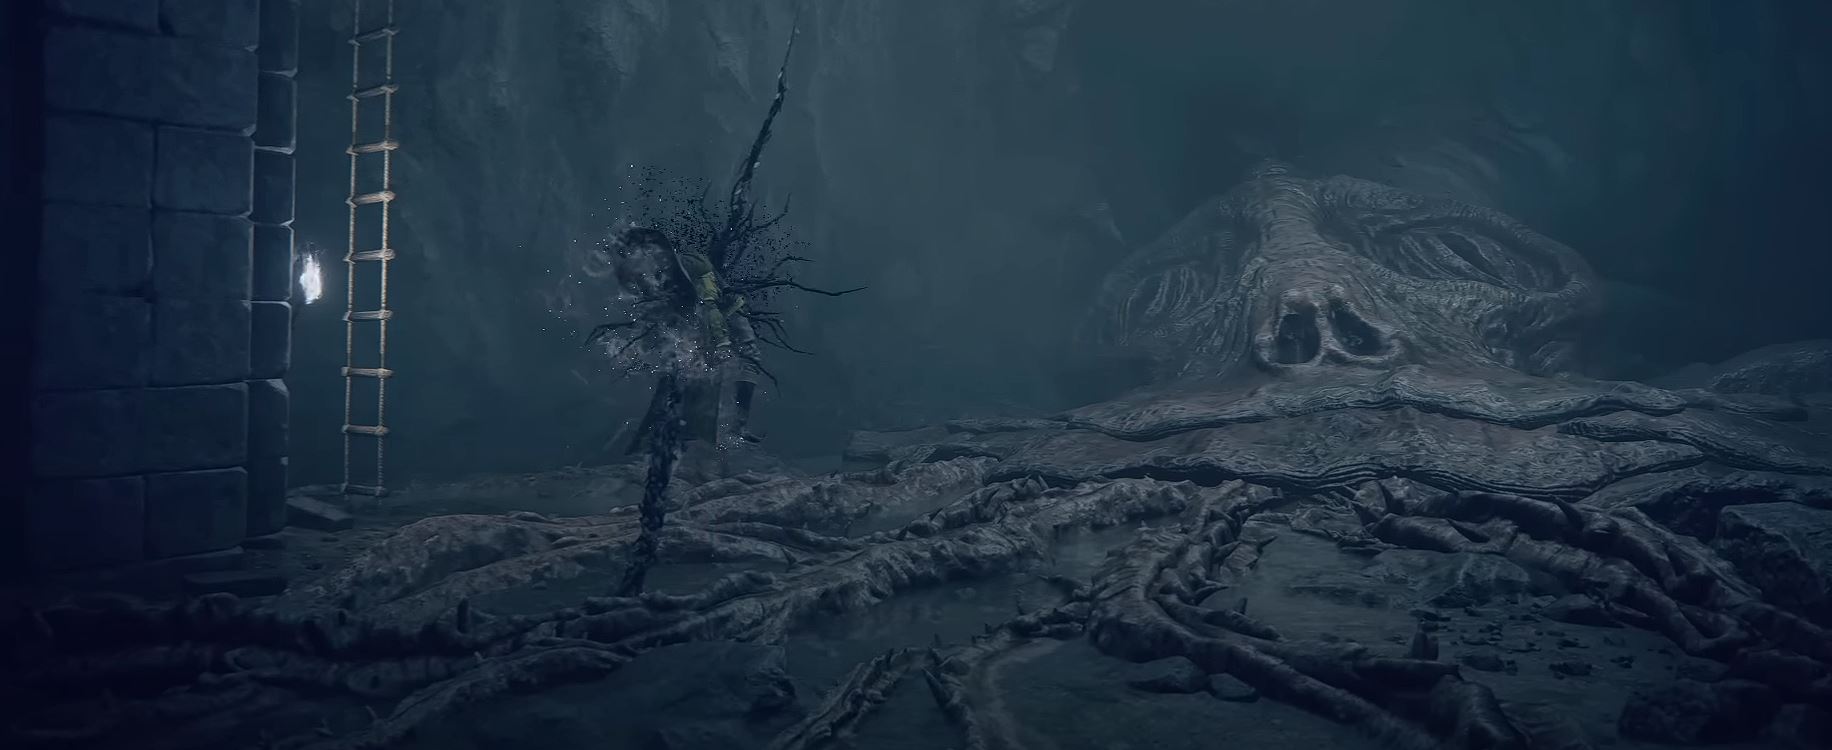 A player character dies from Deathblight in Elden Ring.